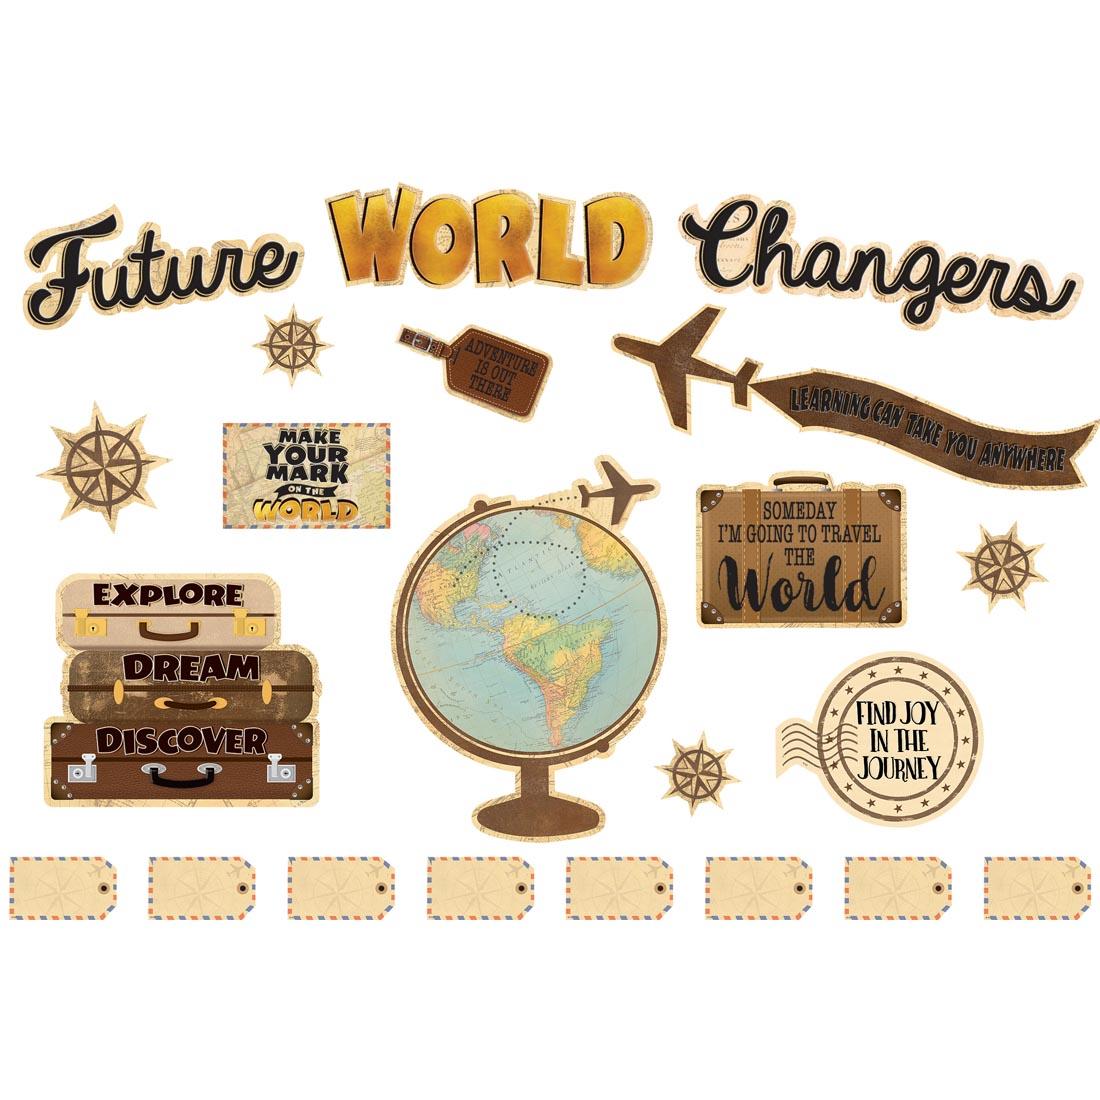 Future World Changers Bulletin Board Set from the Travel the Map collection by Teacher Created Resources